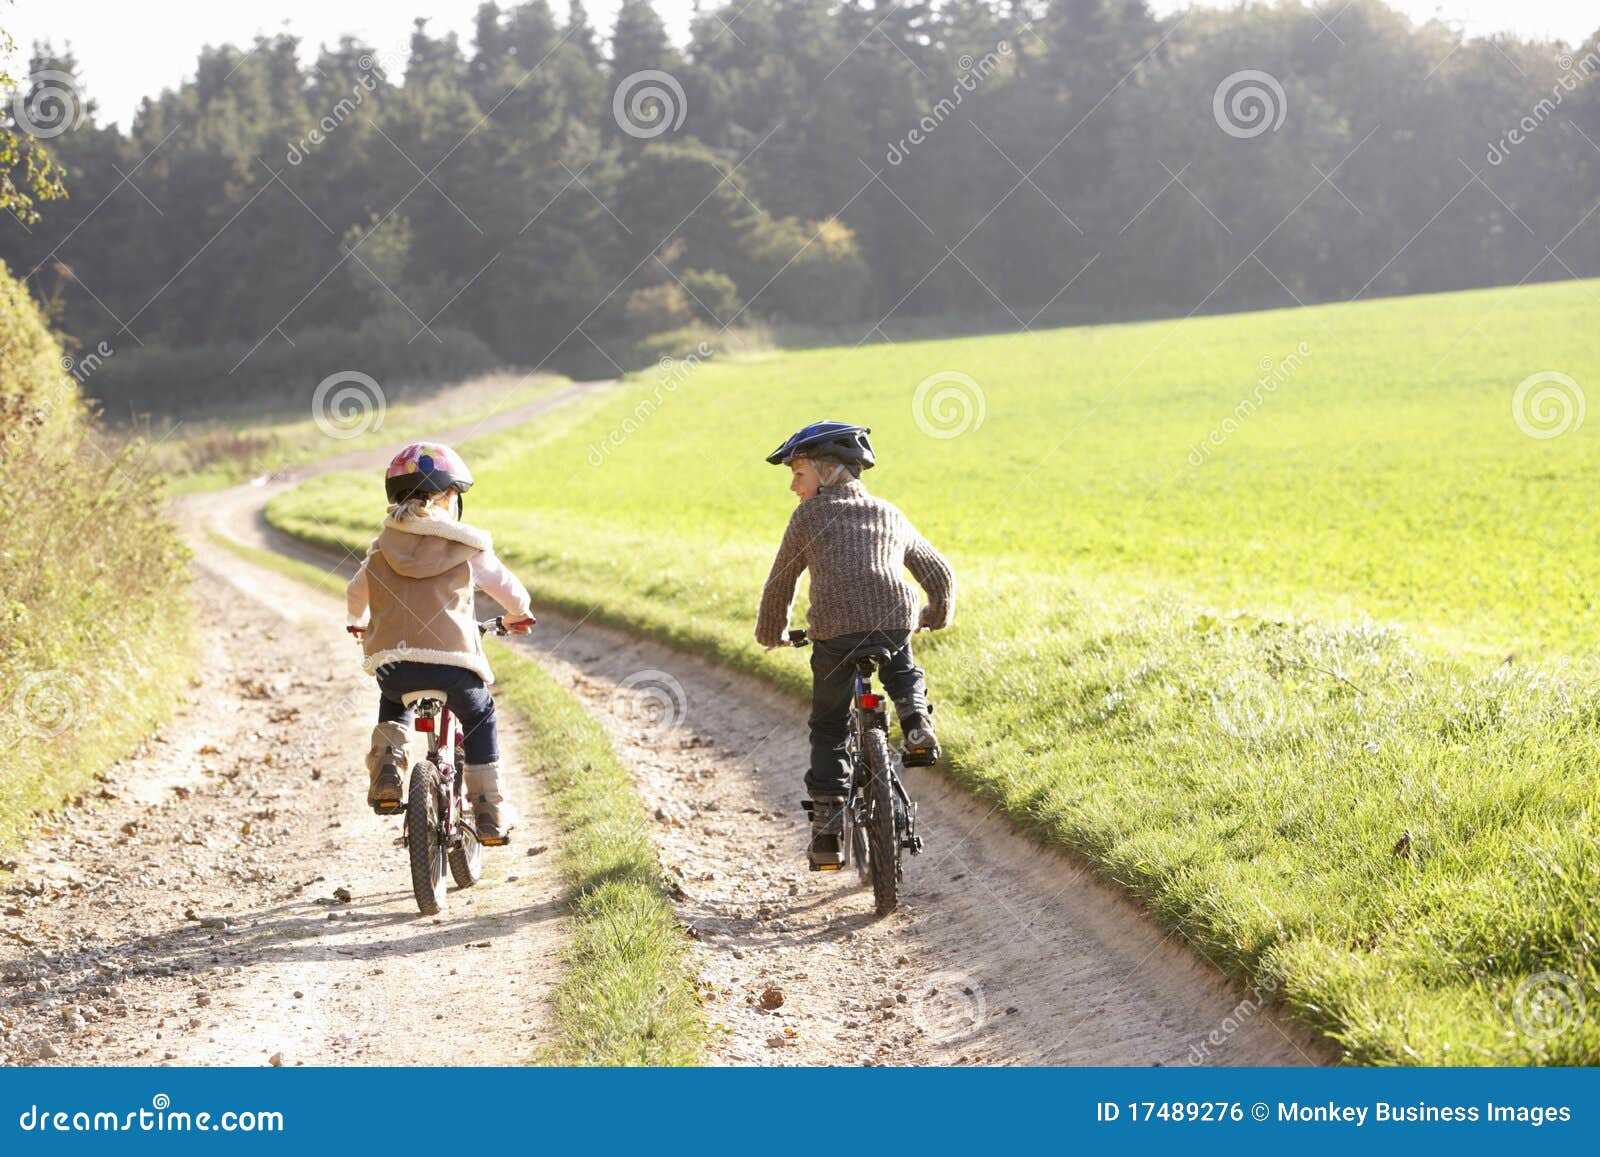 two young children ride bicycles in park